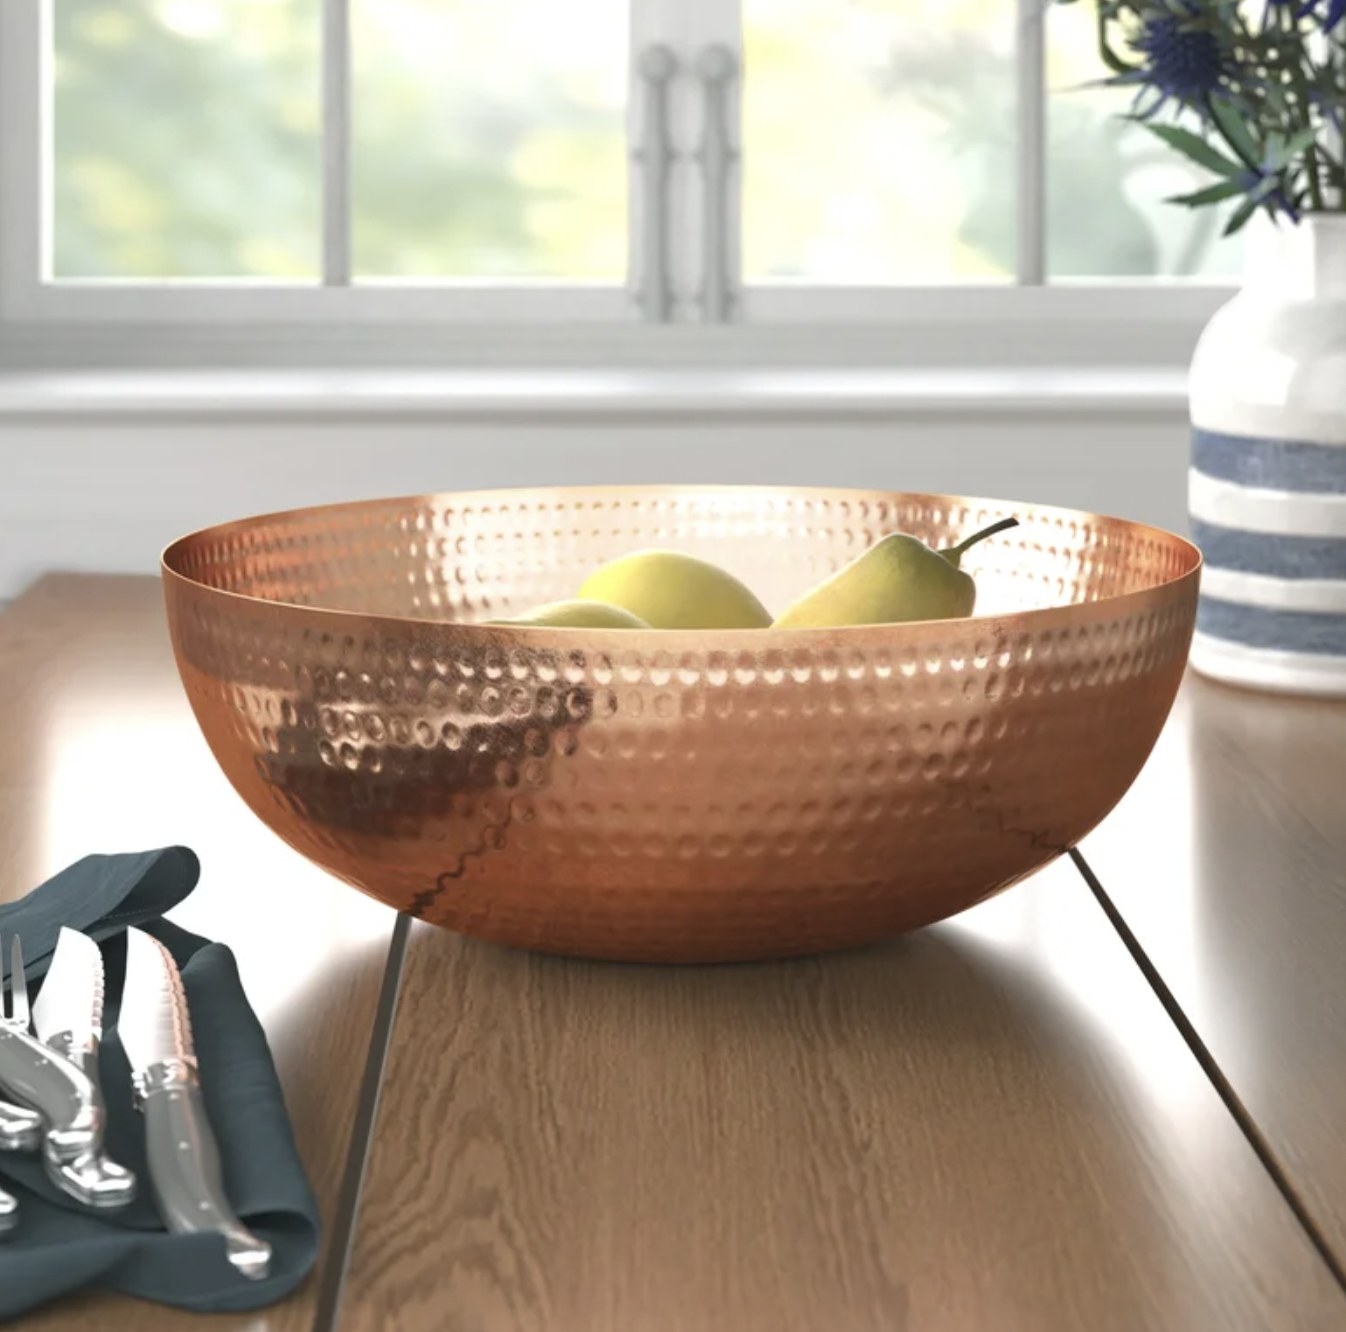 The rose steel bowl with apples and pears